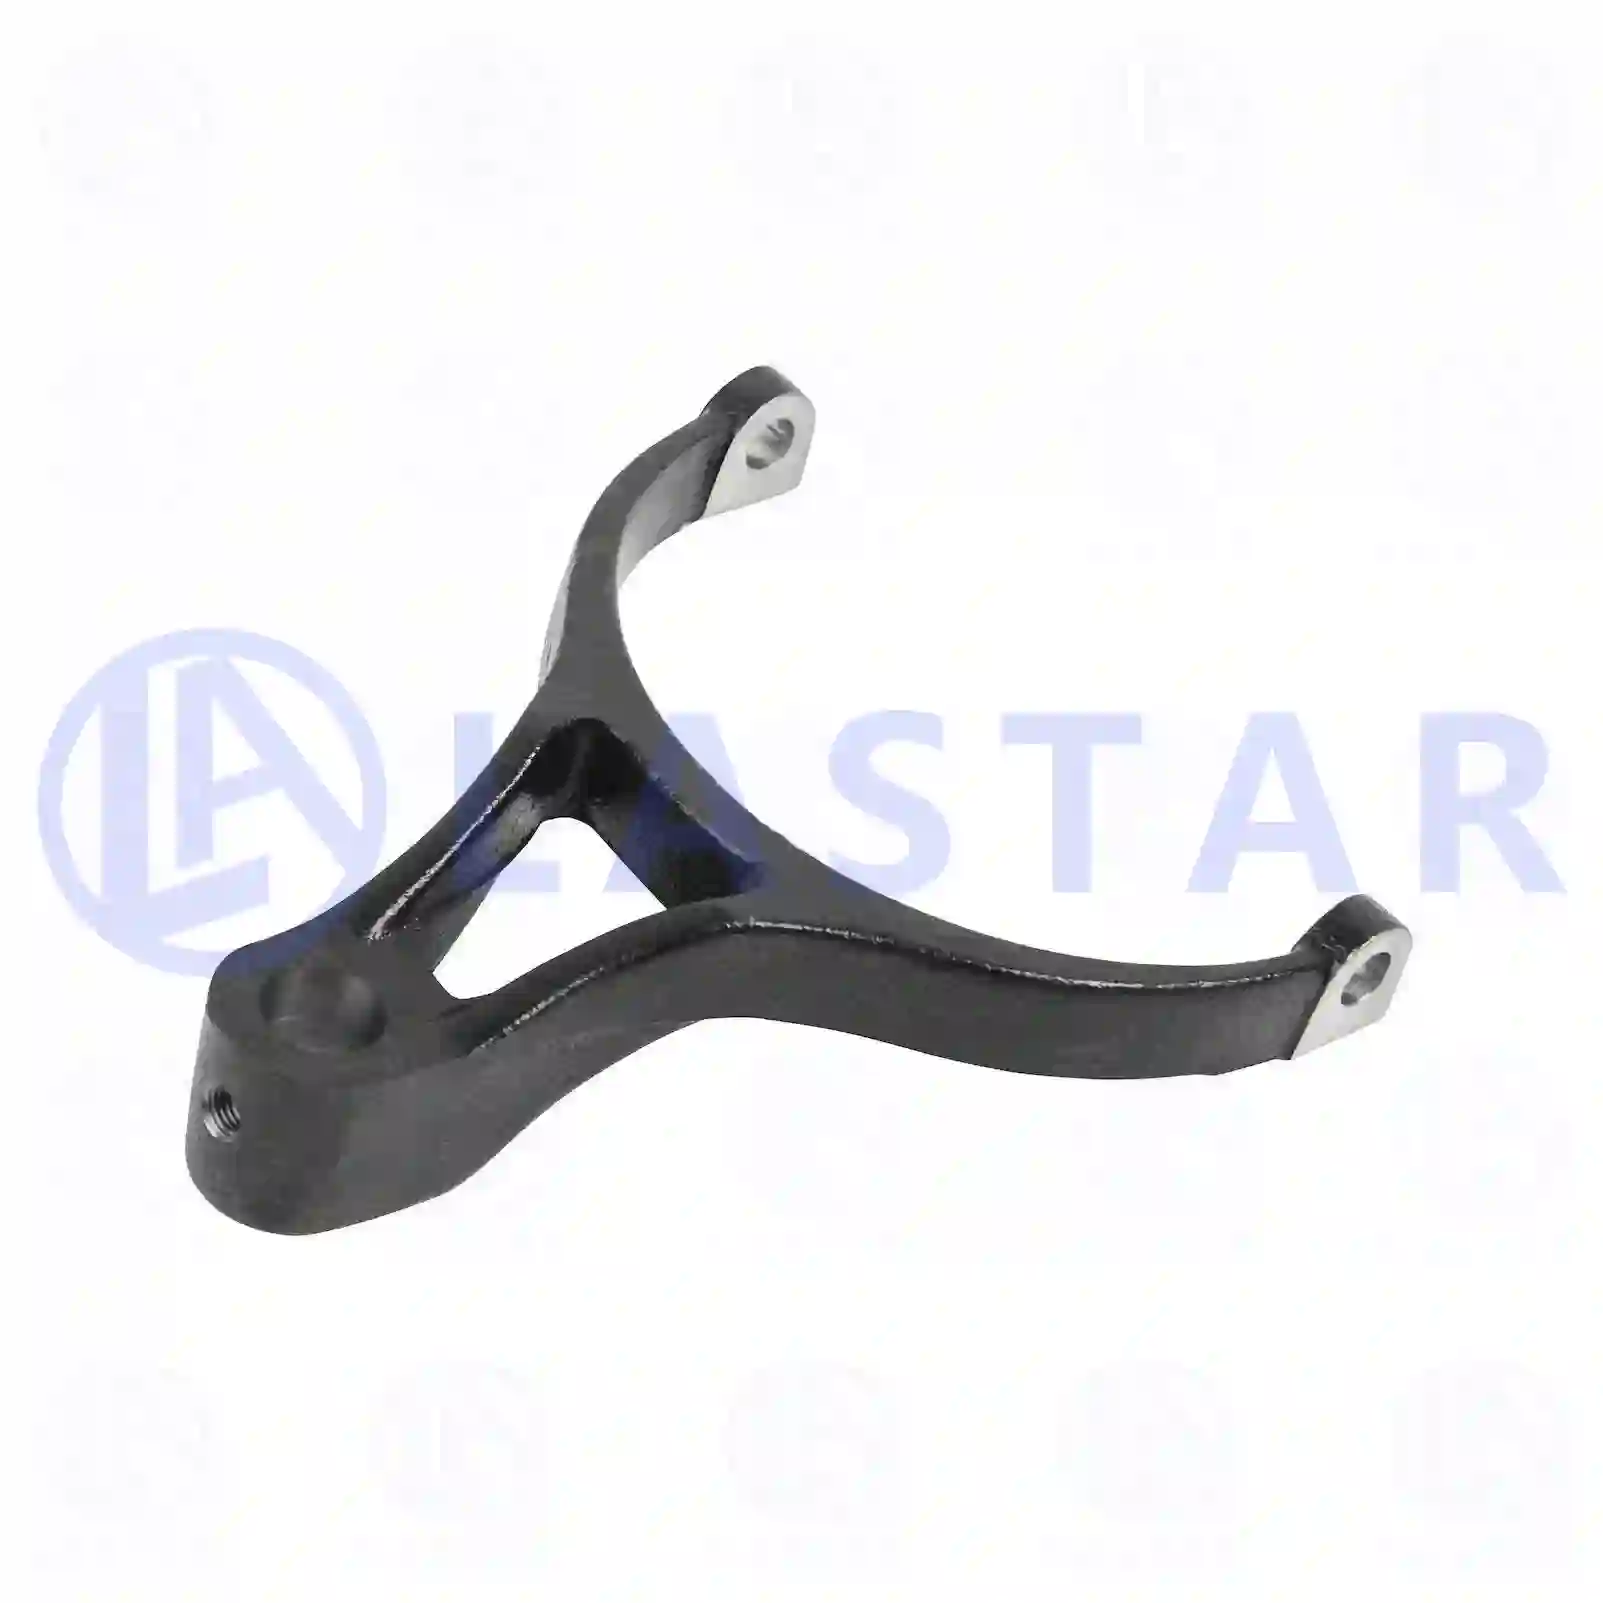 Fork, 77731478, 1521298 ||  77731478 Lastar Spare Part | Truck Spare Parts, Auotomotive Spare Parts Fork, 77731478, 1521298 ||  77731478 Lastar Spare Part | Truck Spare Parts, Auotomotive Spare Parts